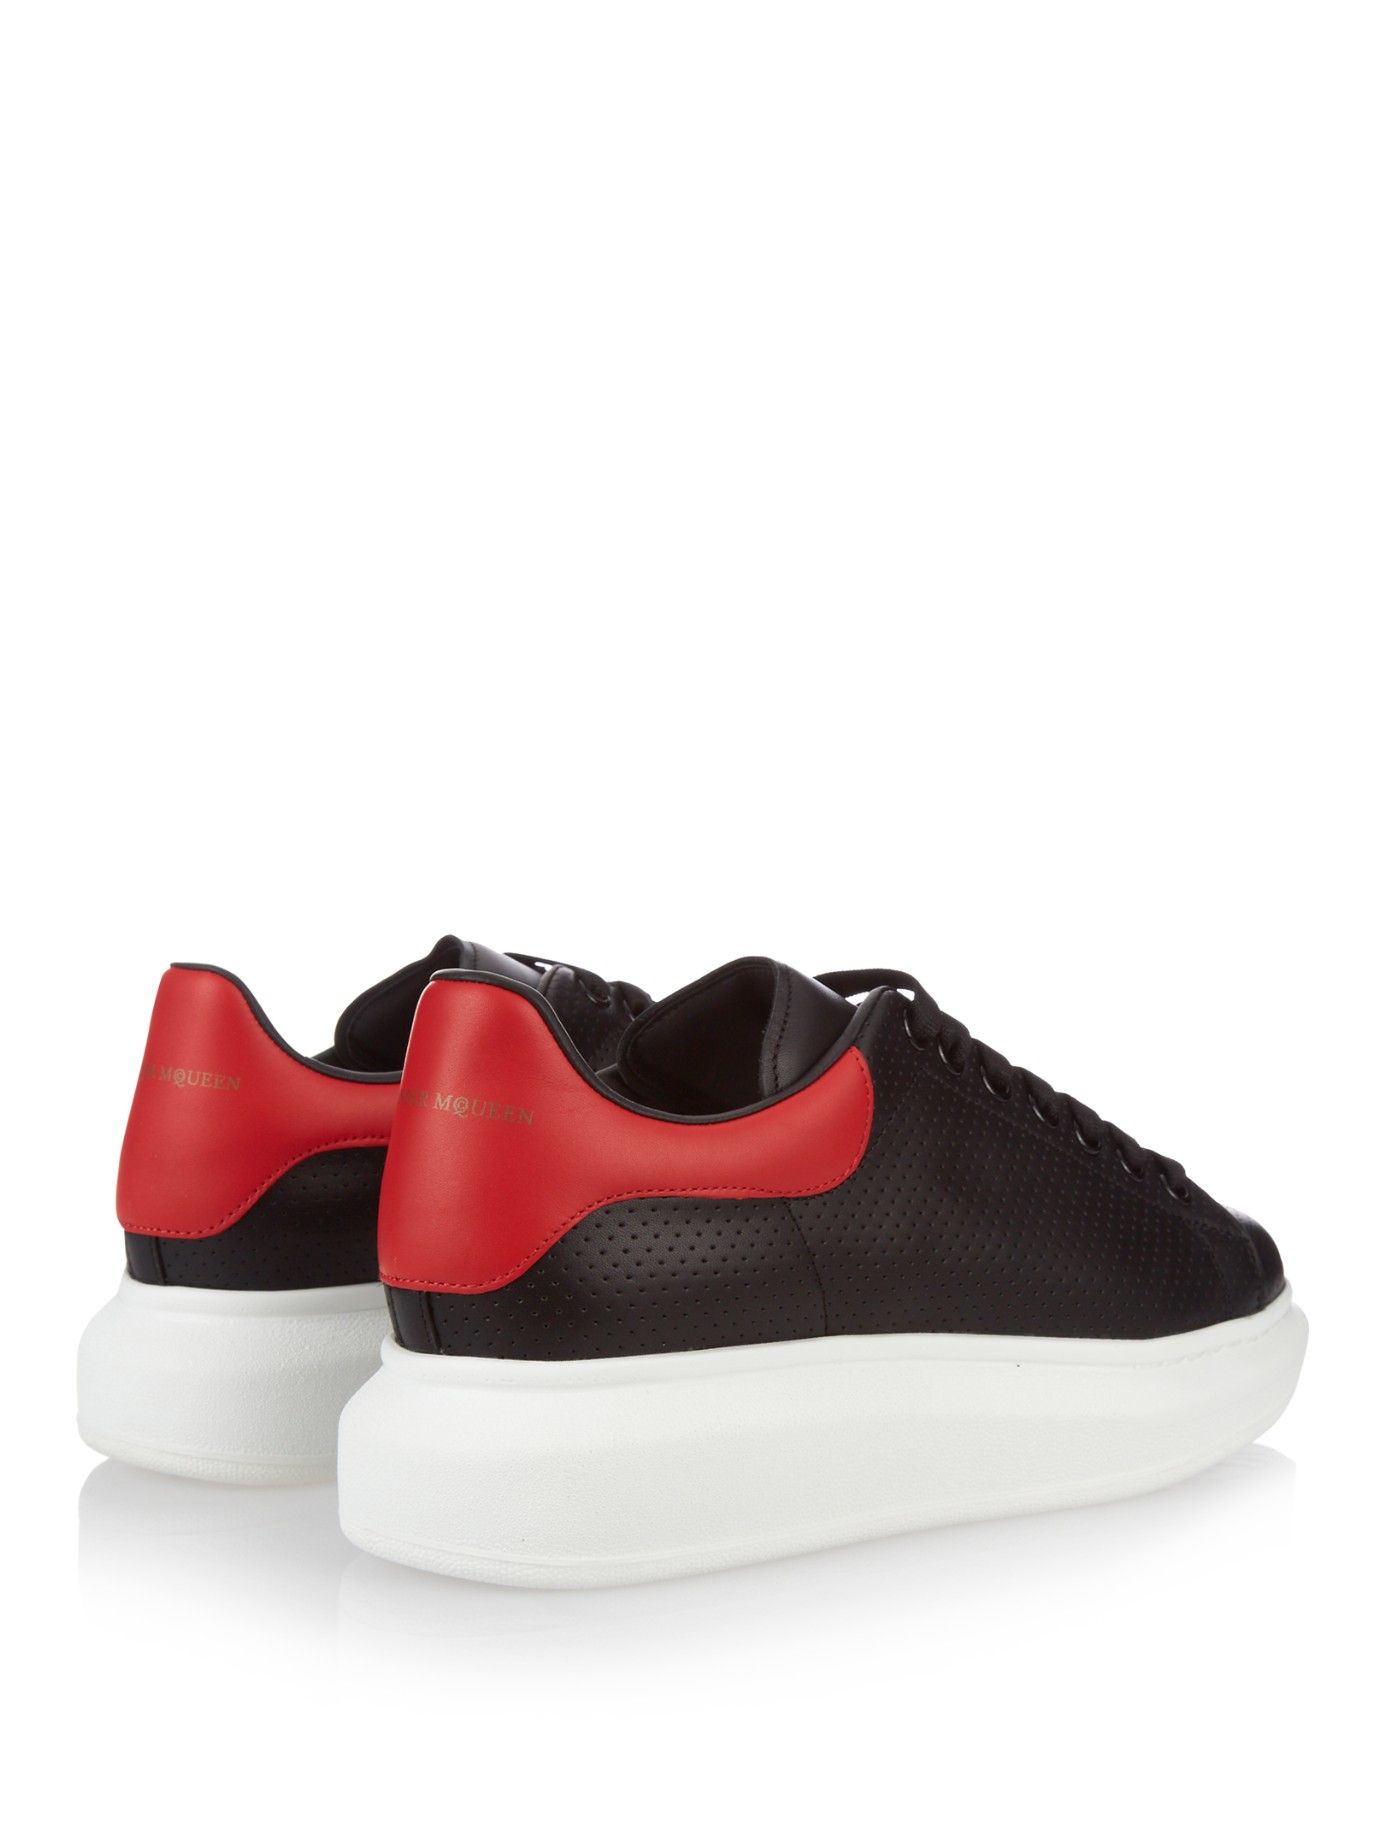 alexander mcqueen black and red